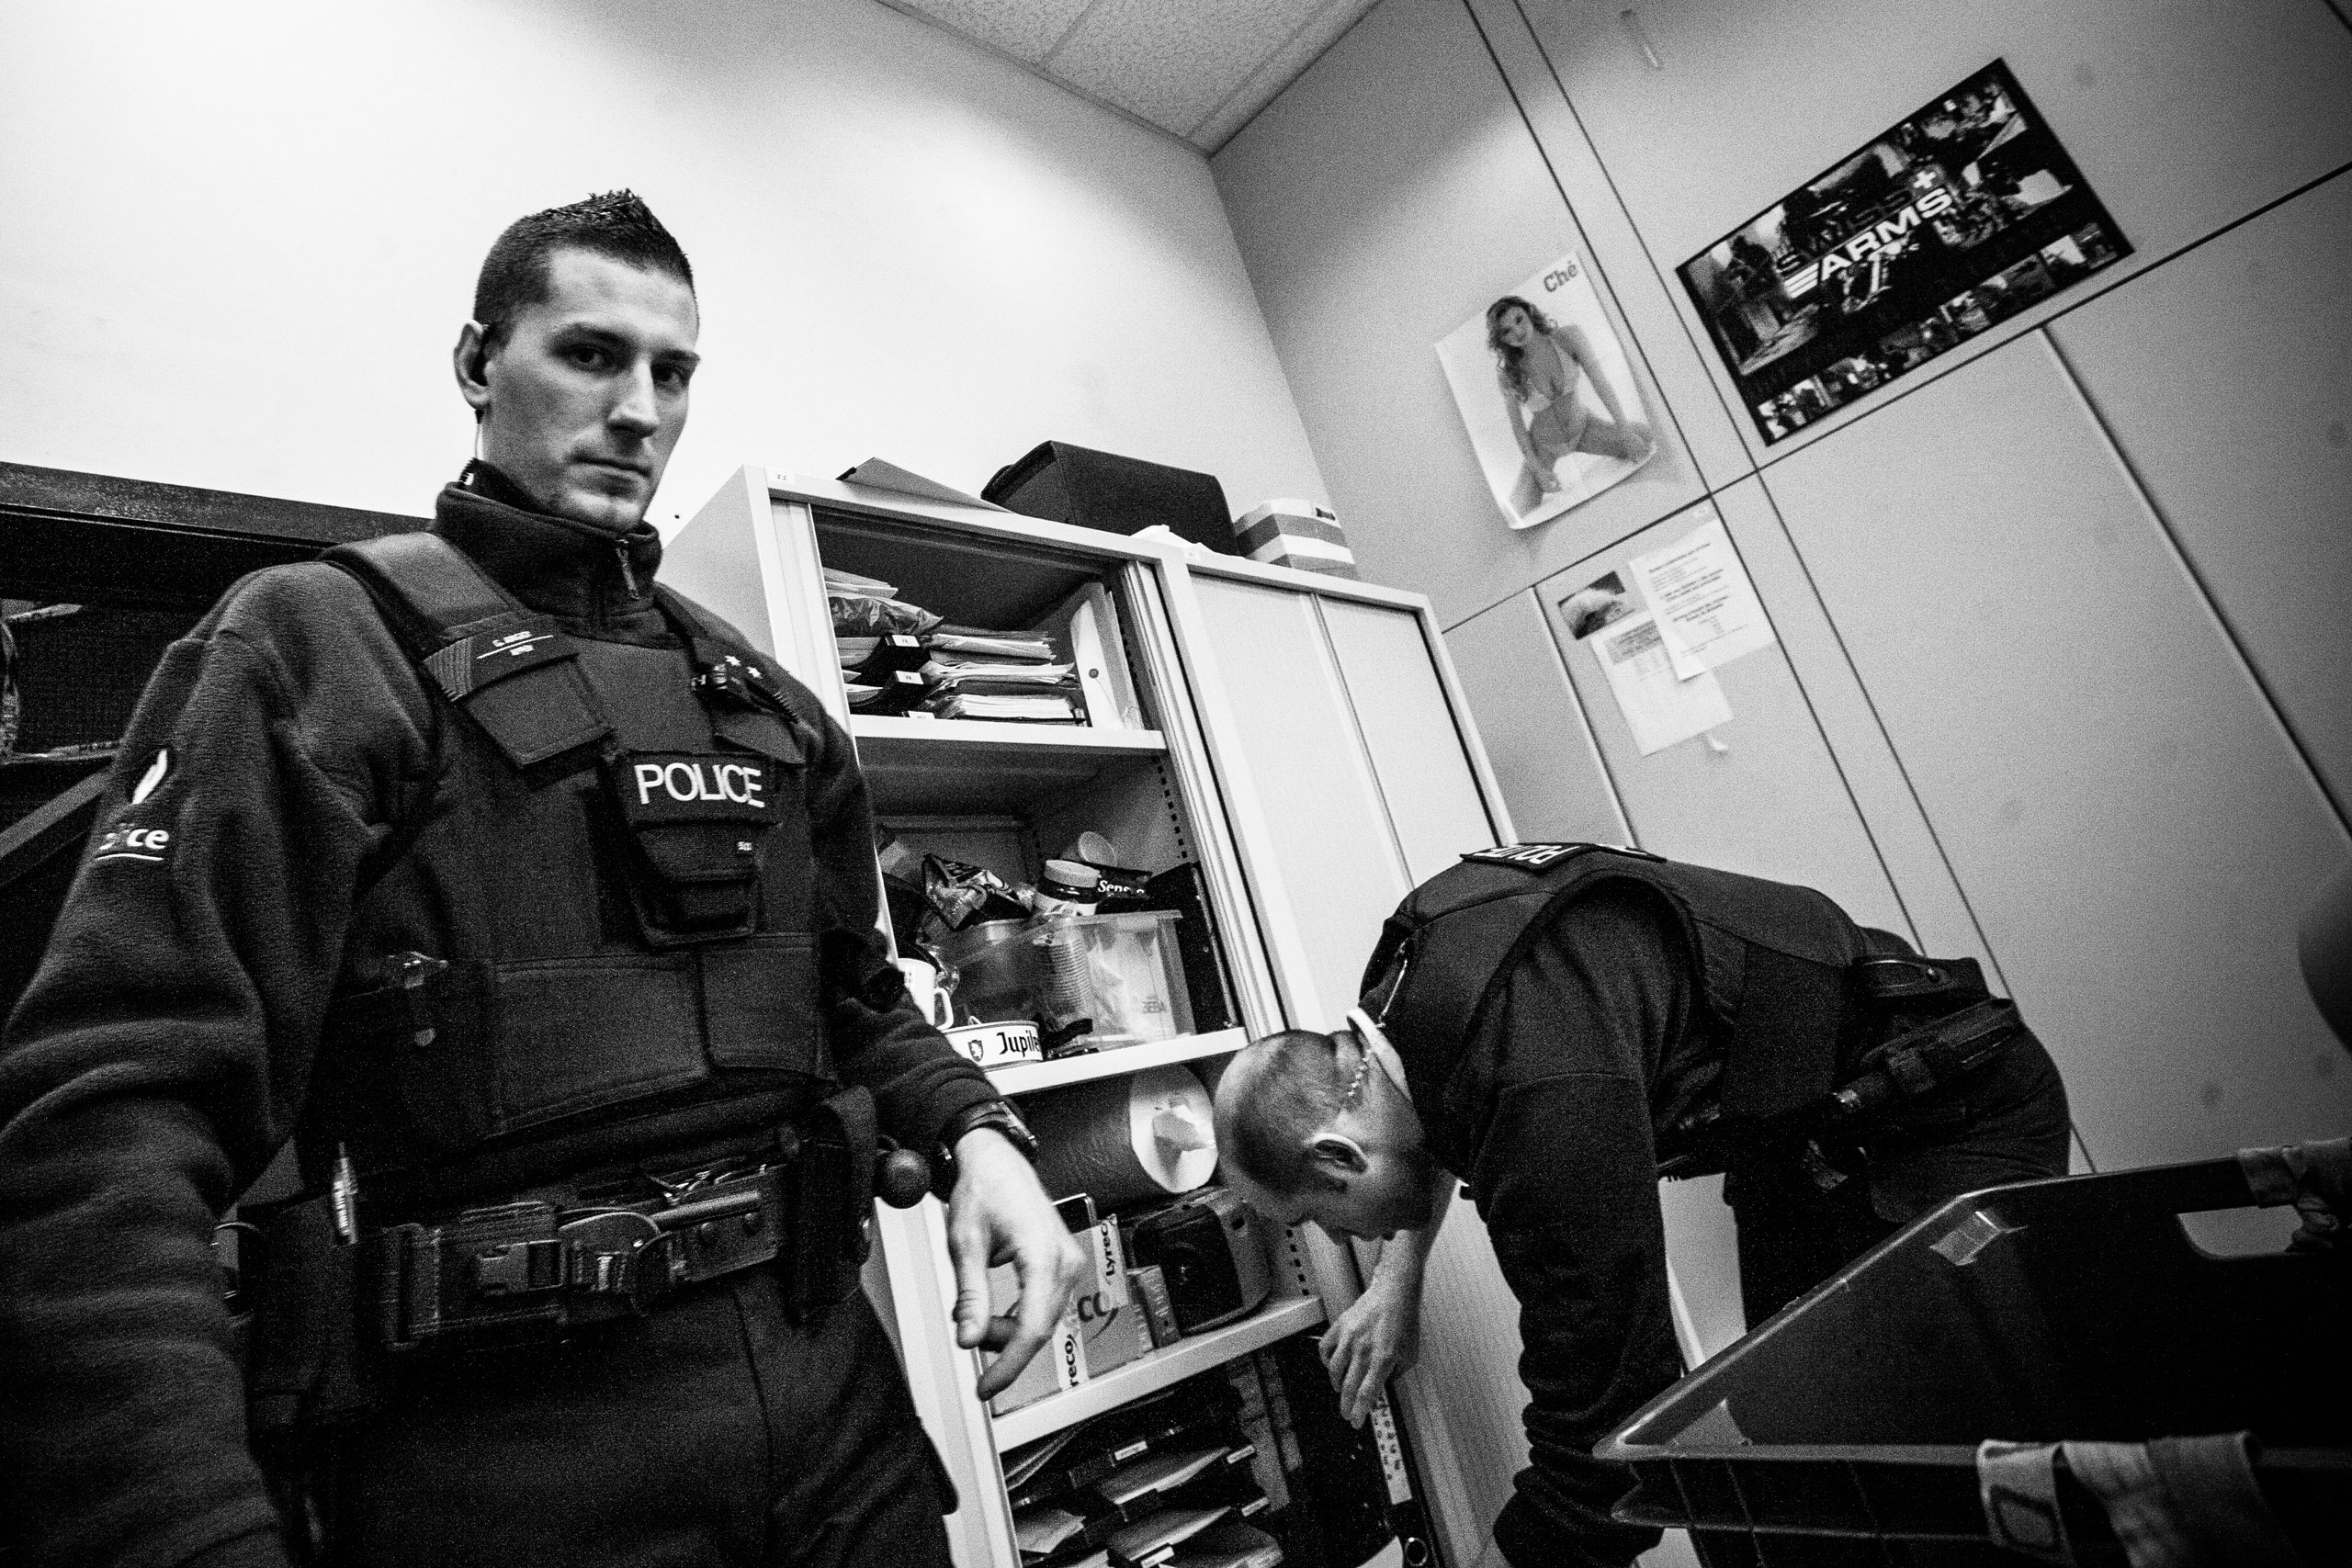 Cops are preparing documents they will work on during the night, Molenbeek, Brussels, Belgium. Feb. 1, 2010.